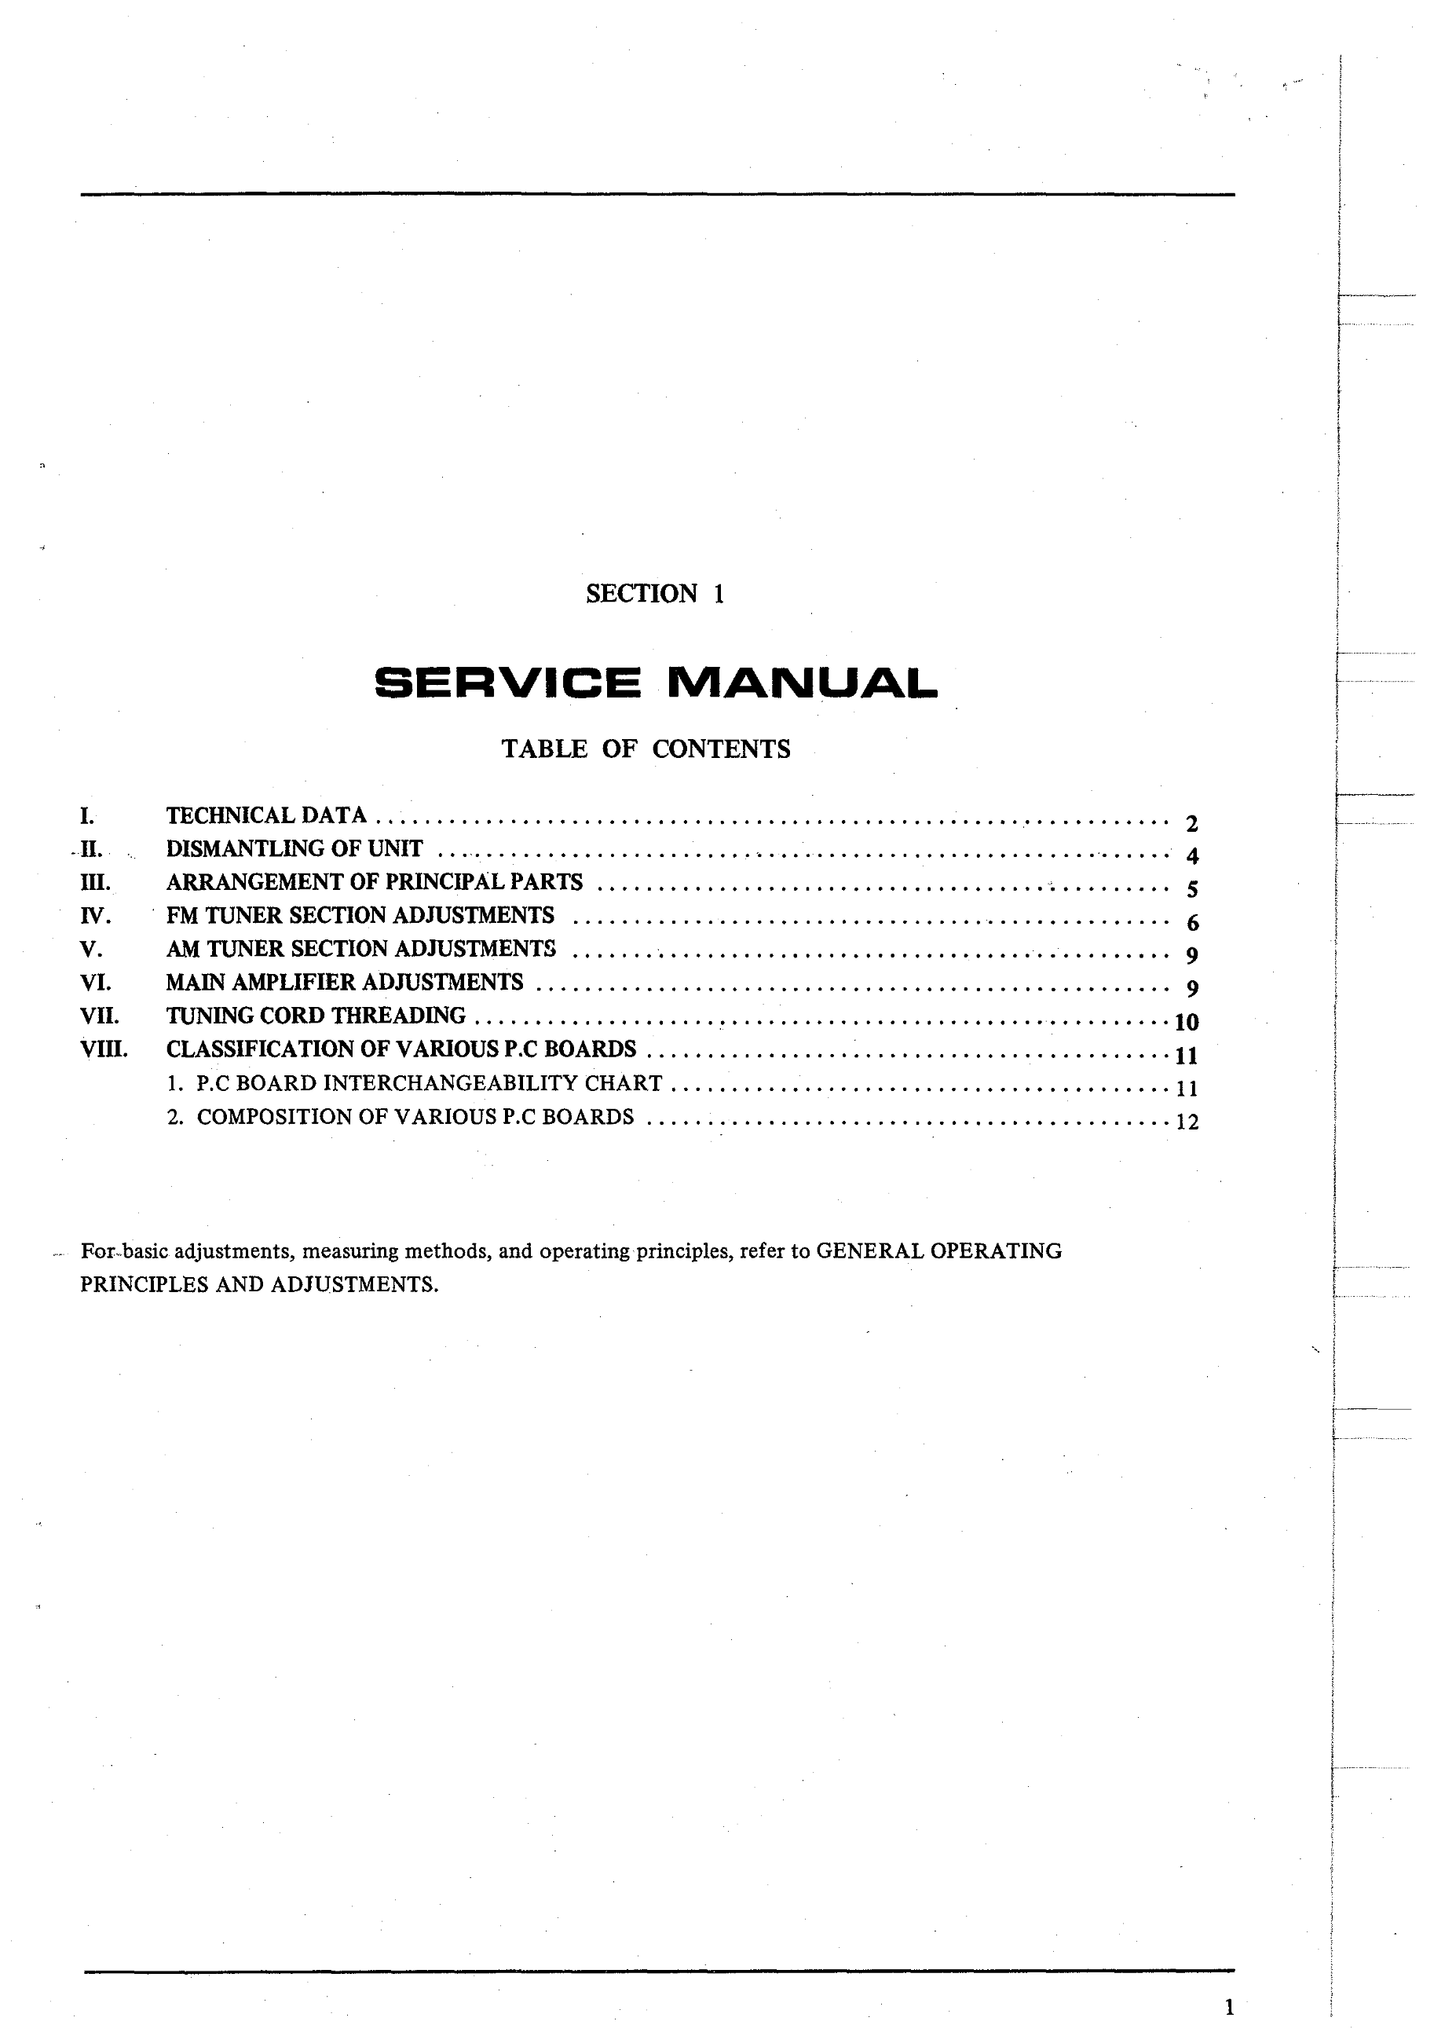 Akai AA-1040 Stereo Receiver Service Manual (Pages: 24)